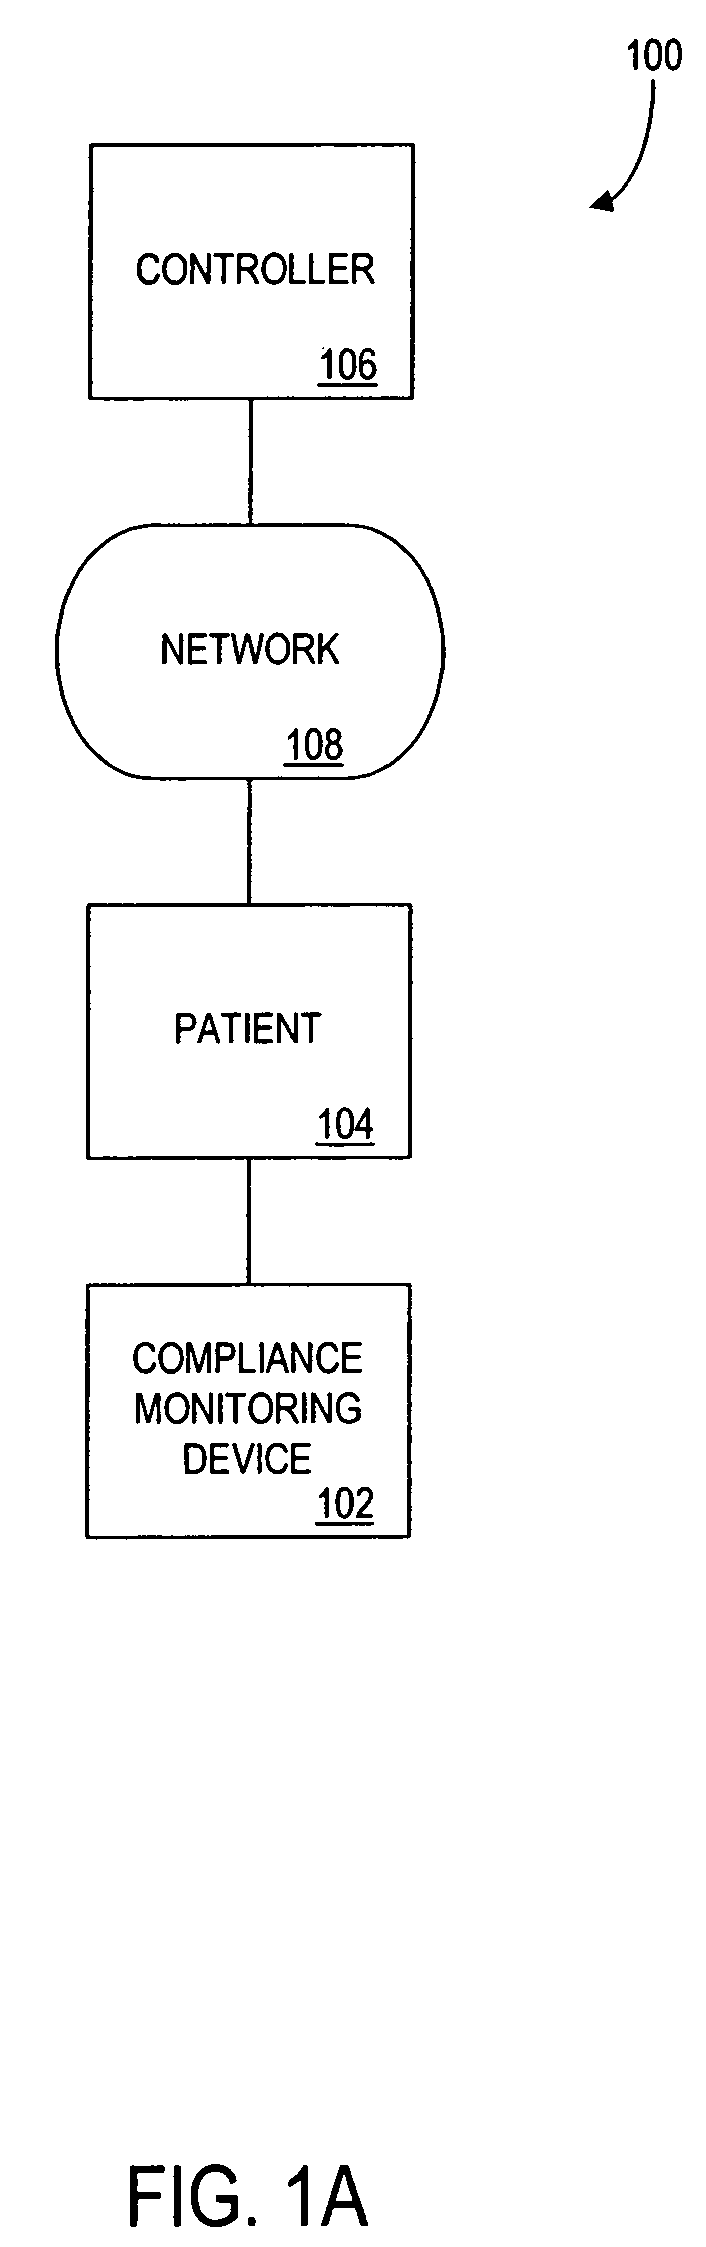 Methods and apparatus for increasing, monitoring and/or rewarding a party's compliance with a schedule for taking medicines